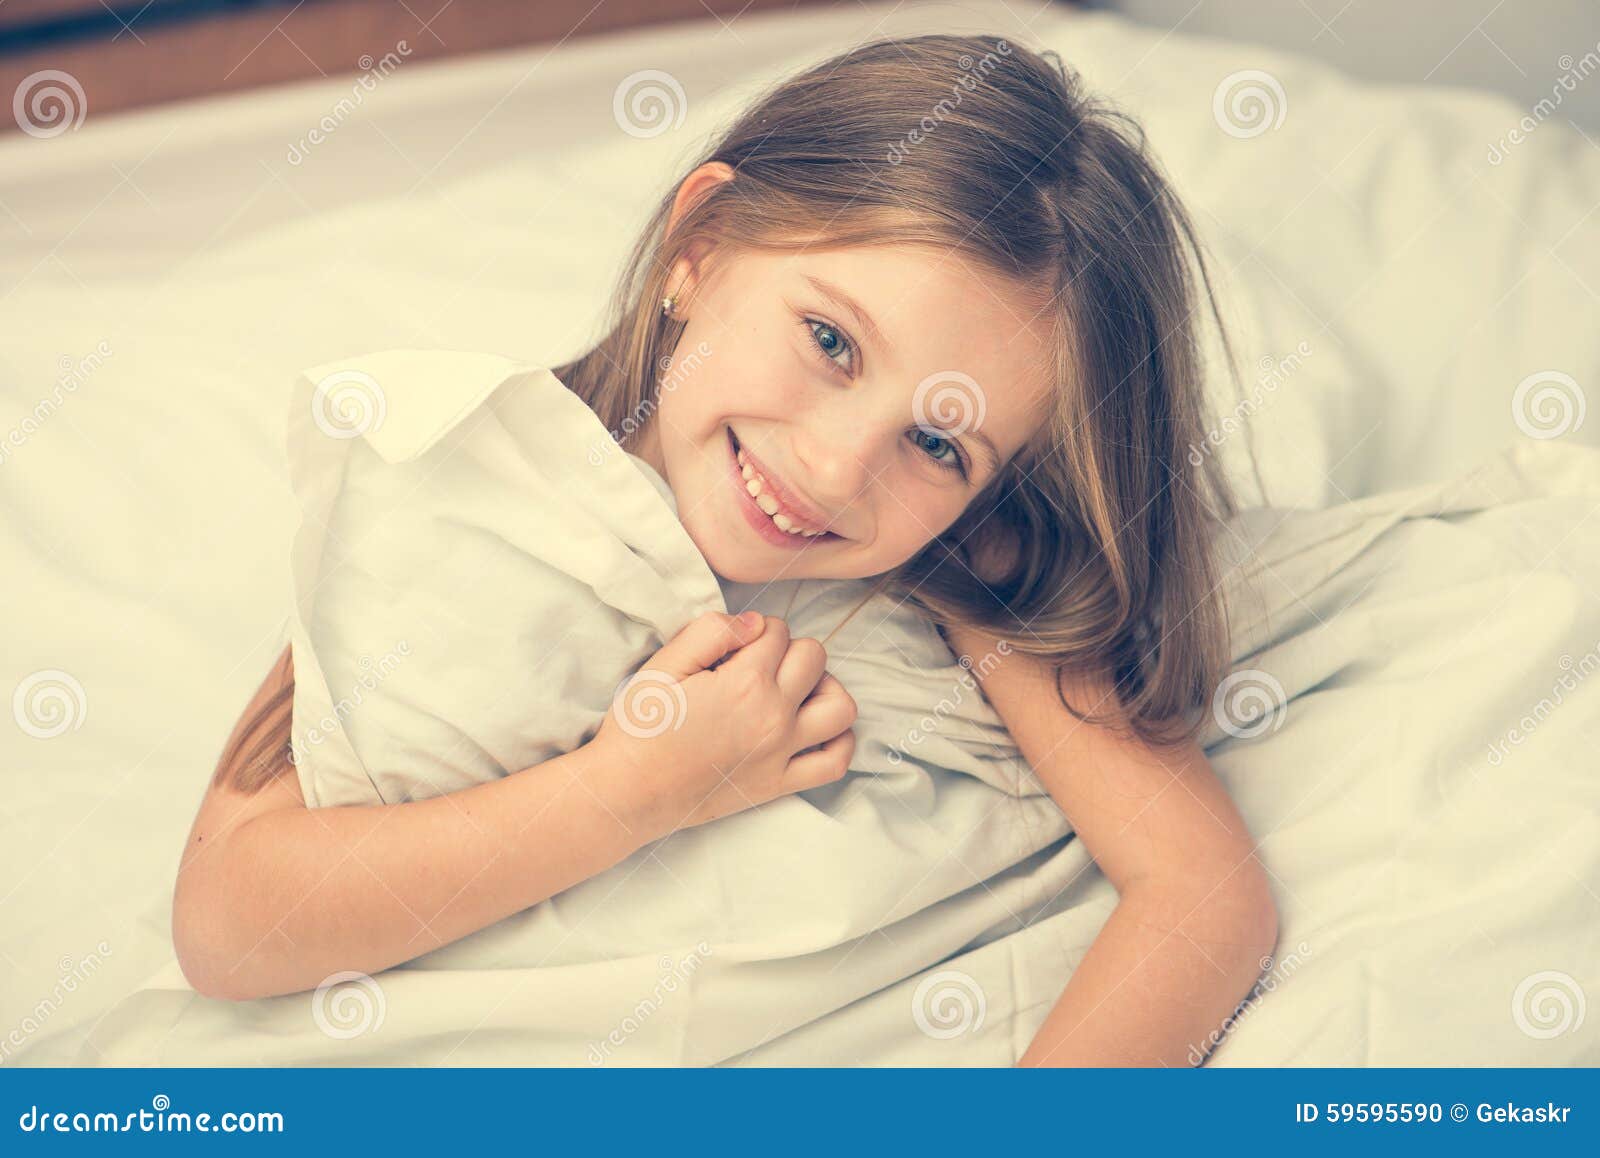 Cute little girl in a bad stock photo. Image of closeup - 59595590